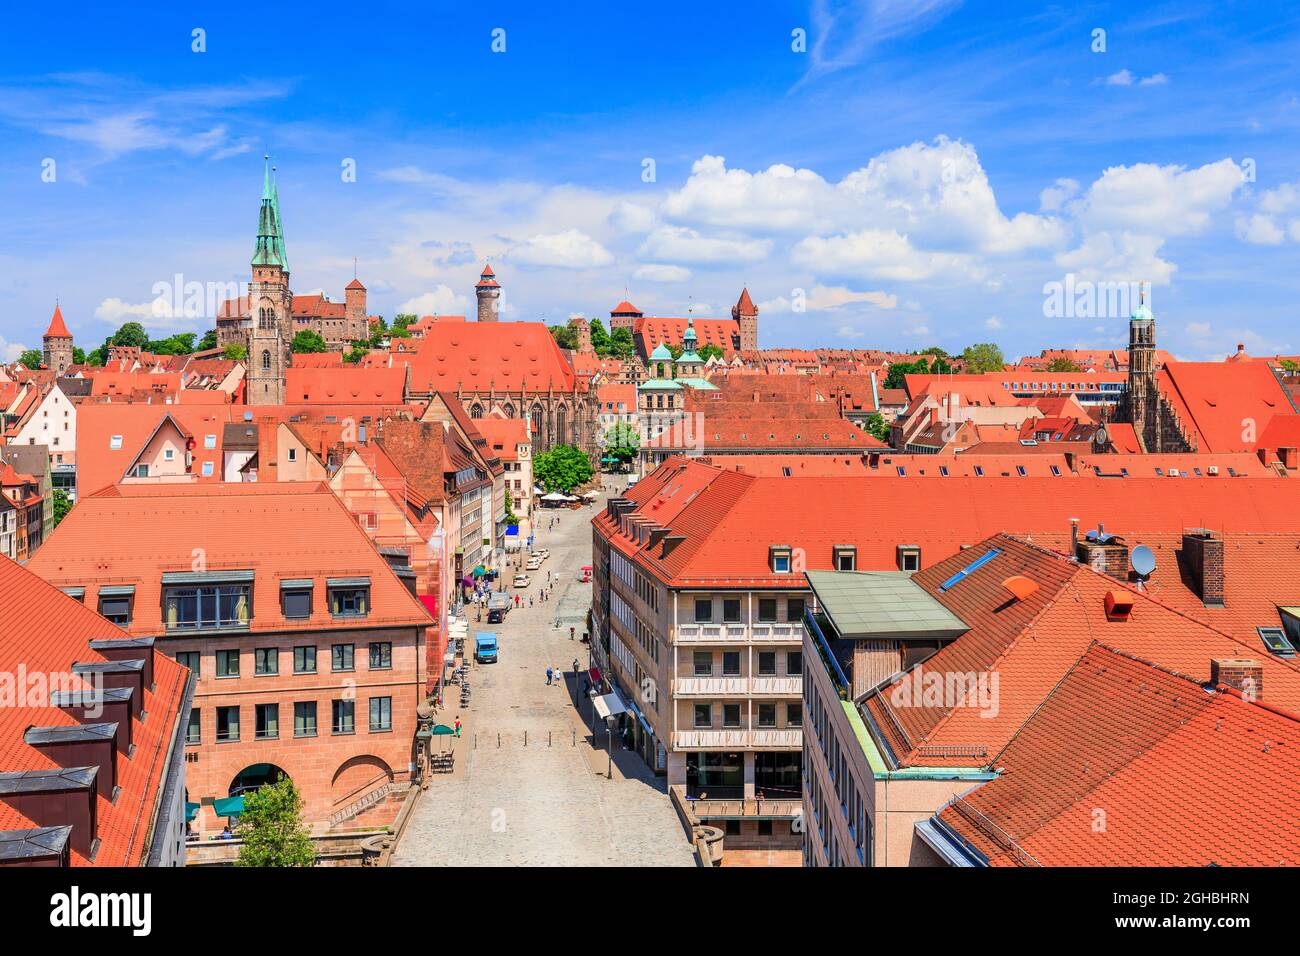 Nuremberg, Germany. The rooftops of the Old Town with the Kaiserburg in the background. Stock Photo